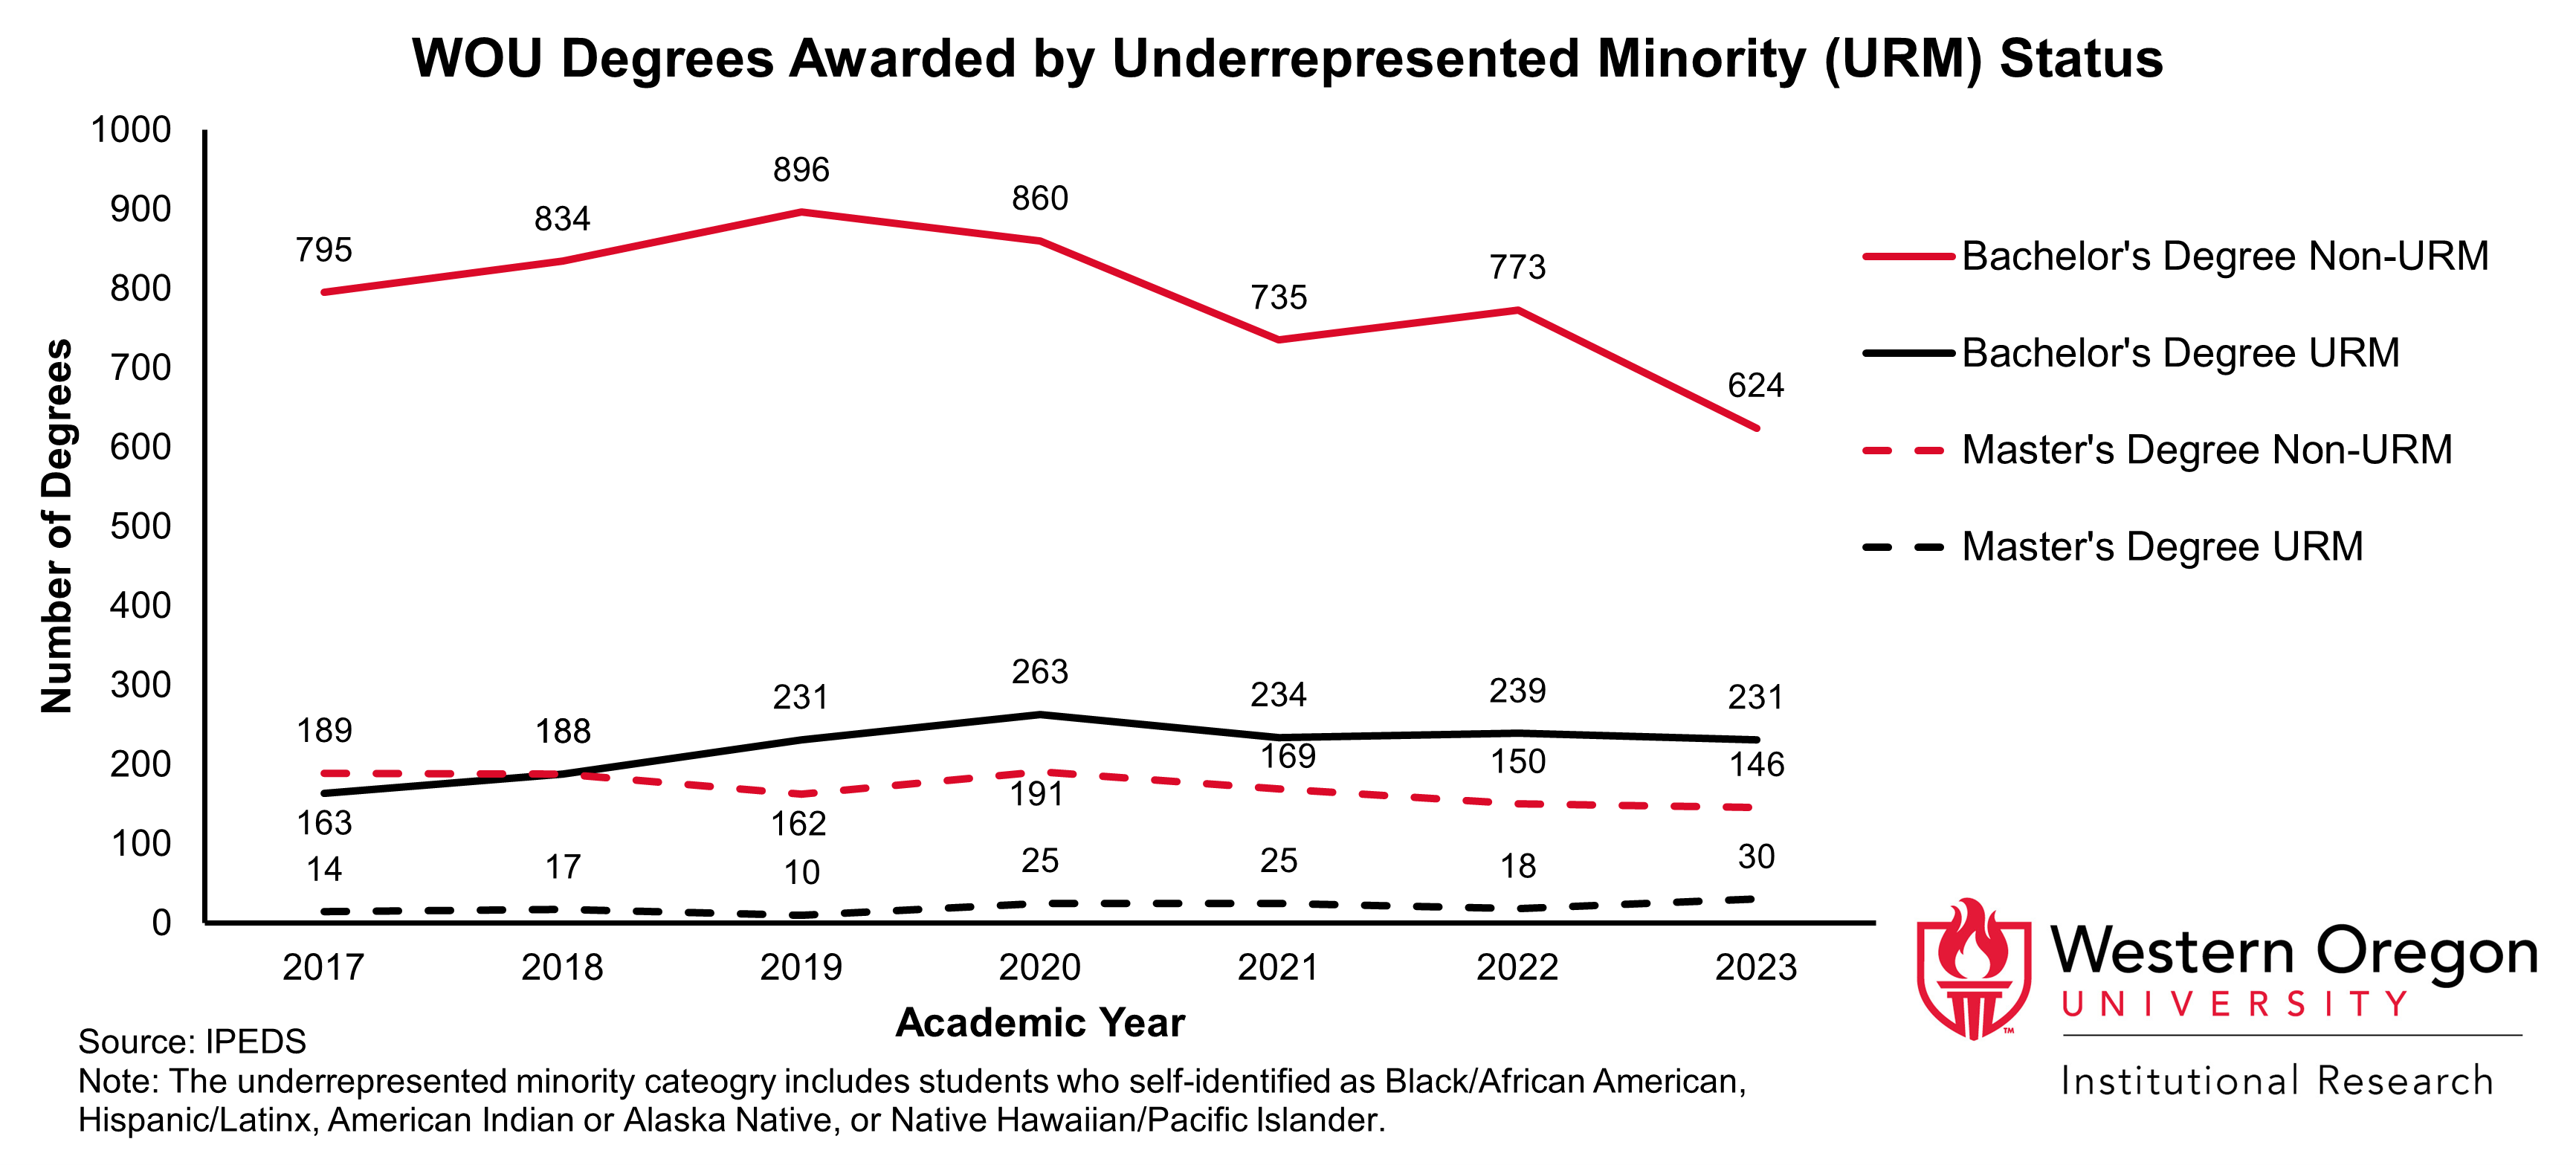 Line graph of the total number of Bachelor's and Master's degrees awarded at WOU between 2017 and 2023, broken out by Underrepresented Minority status , showing that the number of degrees awarded to students from underrepresented minority groups has been steadily increasing since 2017.